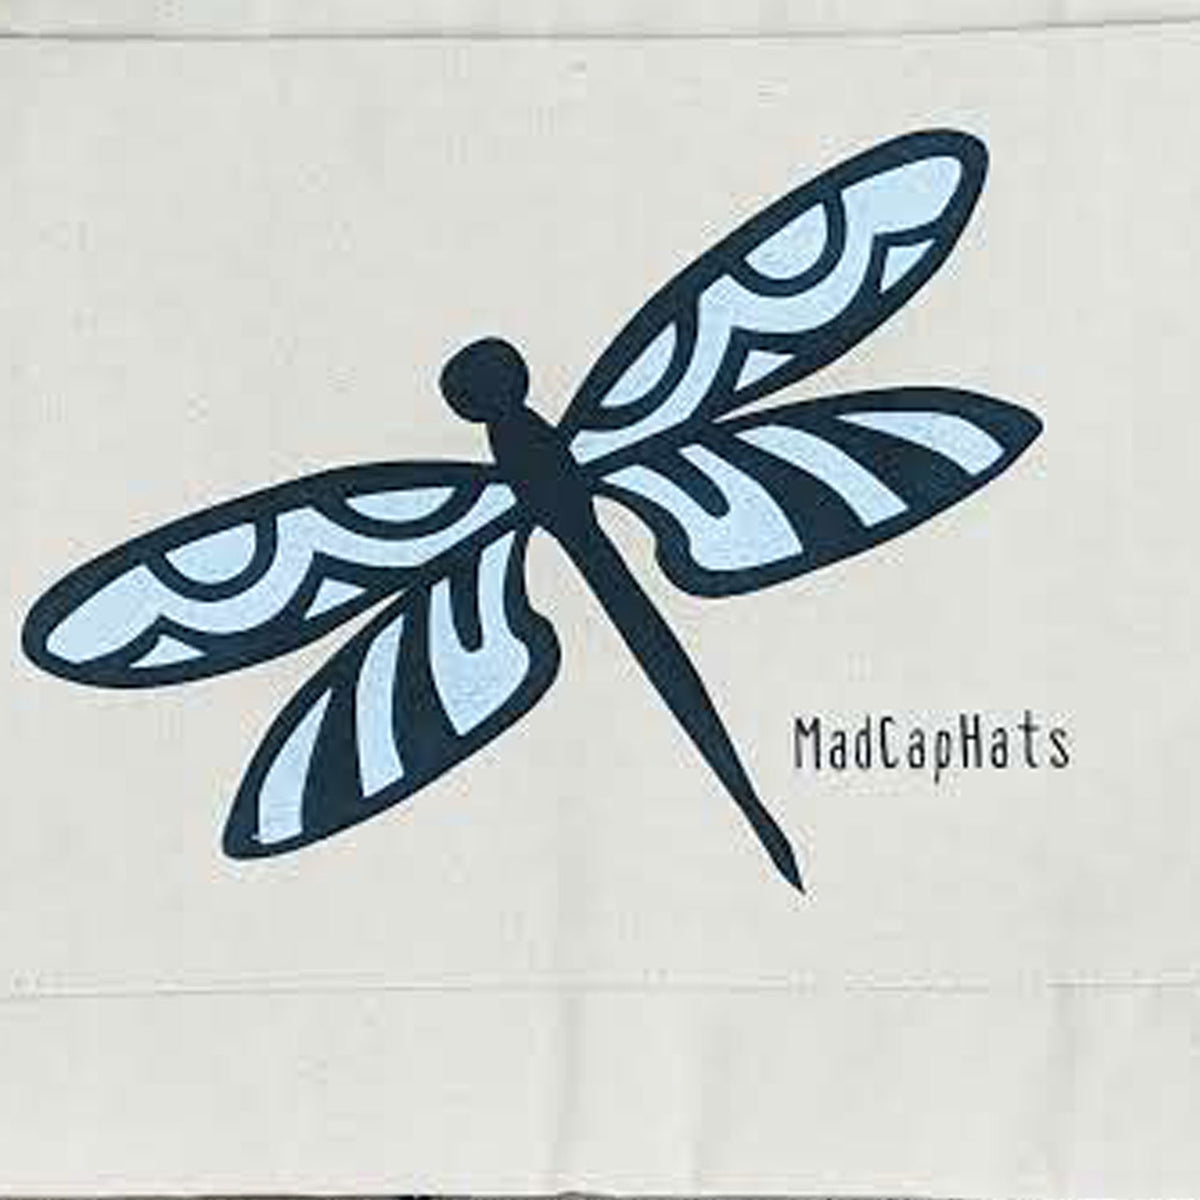 Dragonfly Cotton Canvas Tote Bag